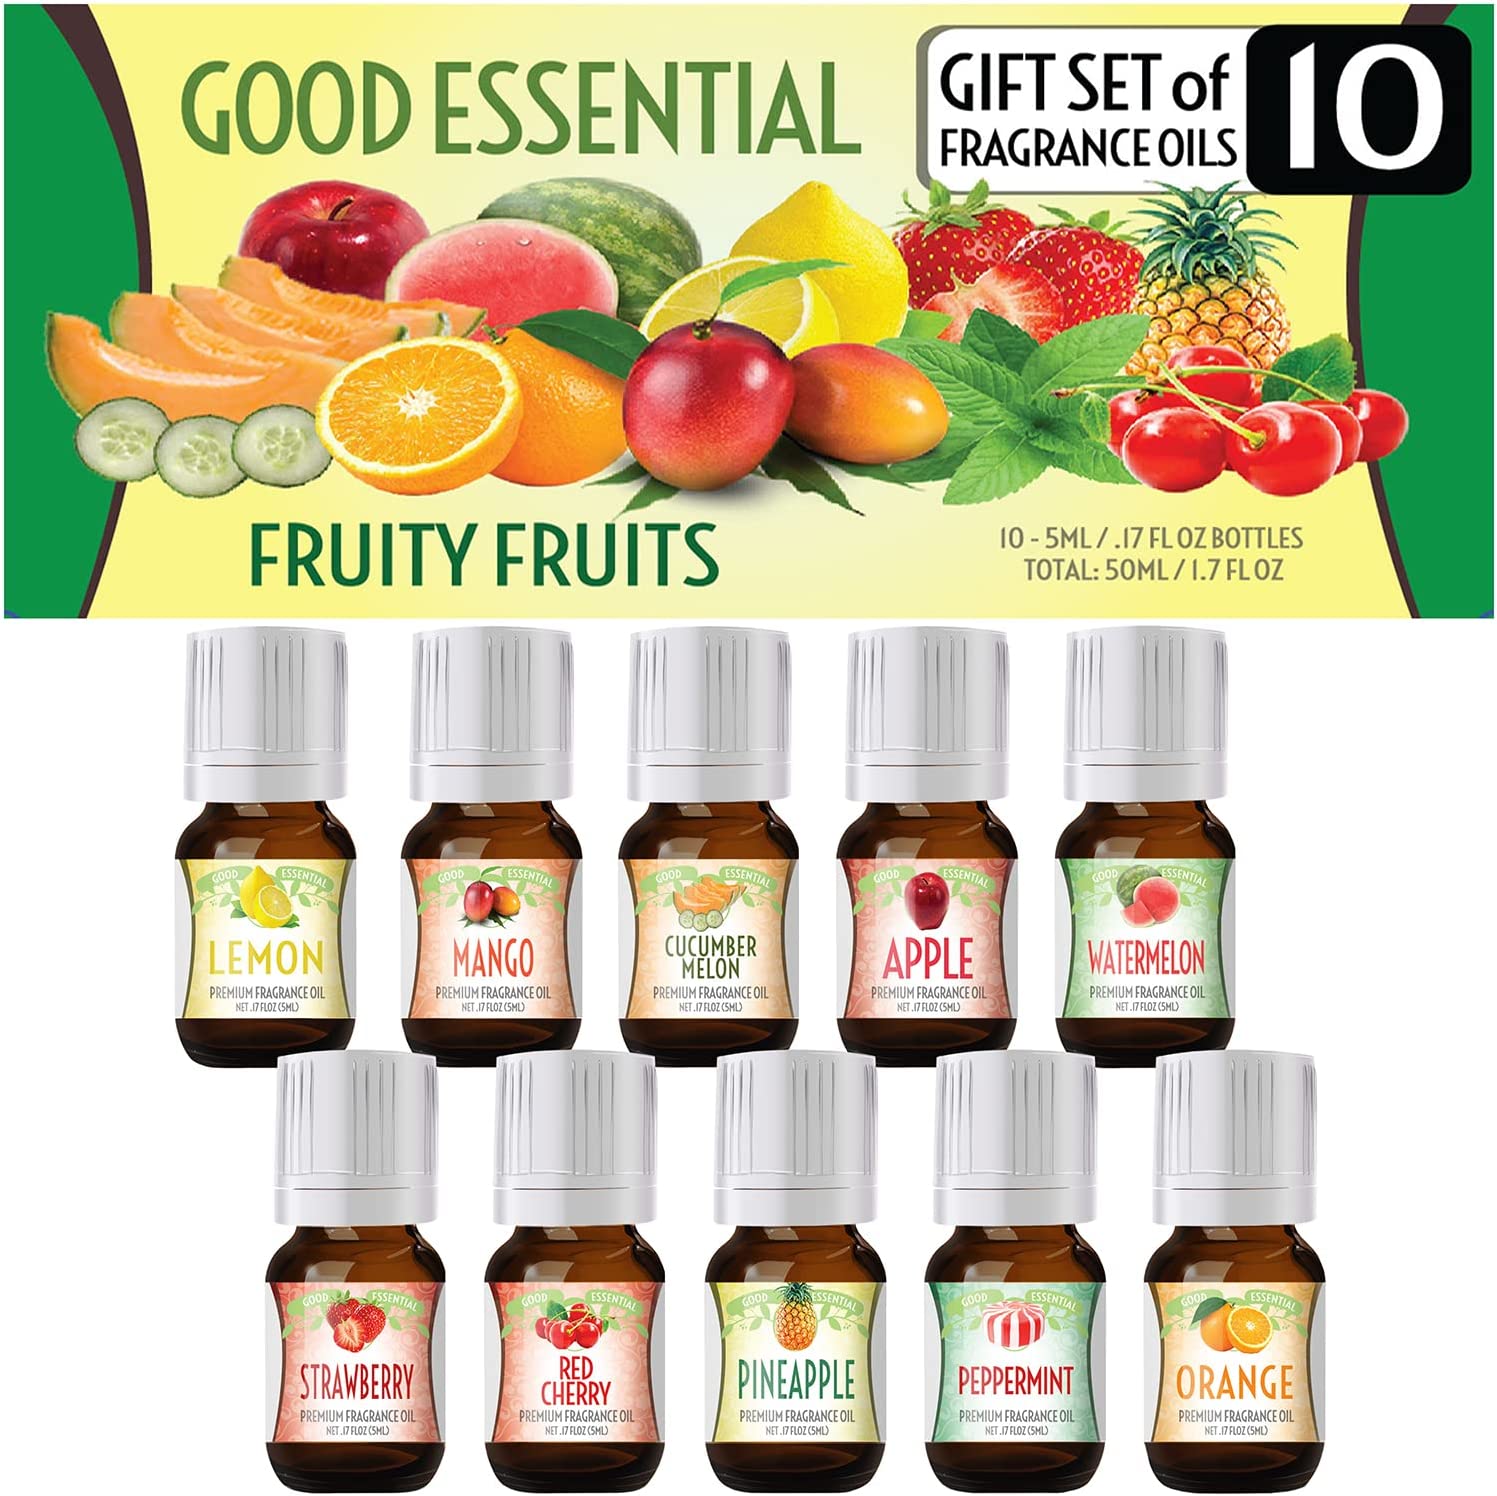 Fruity Fruits Good Essential Fragrance Oil Set (PACK OF 10) 5ml Set  Includes Strawberry, Apple, Watermelon, Pineapple, Cucumber Melon, Red  Cherry